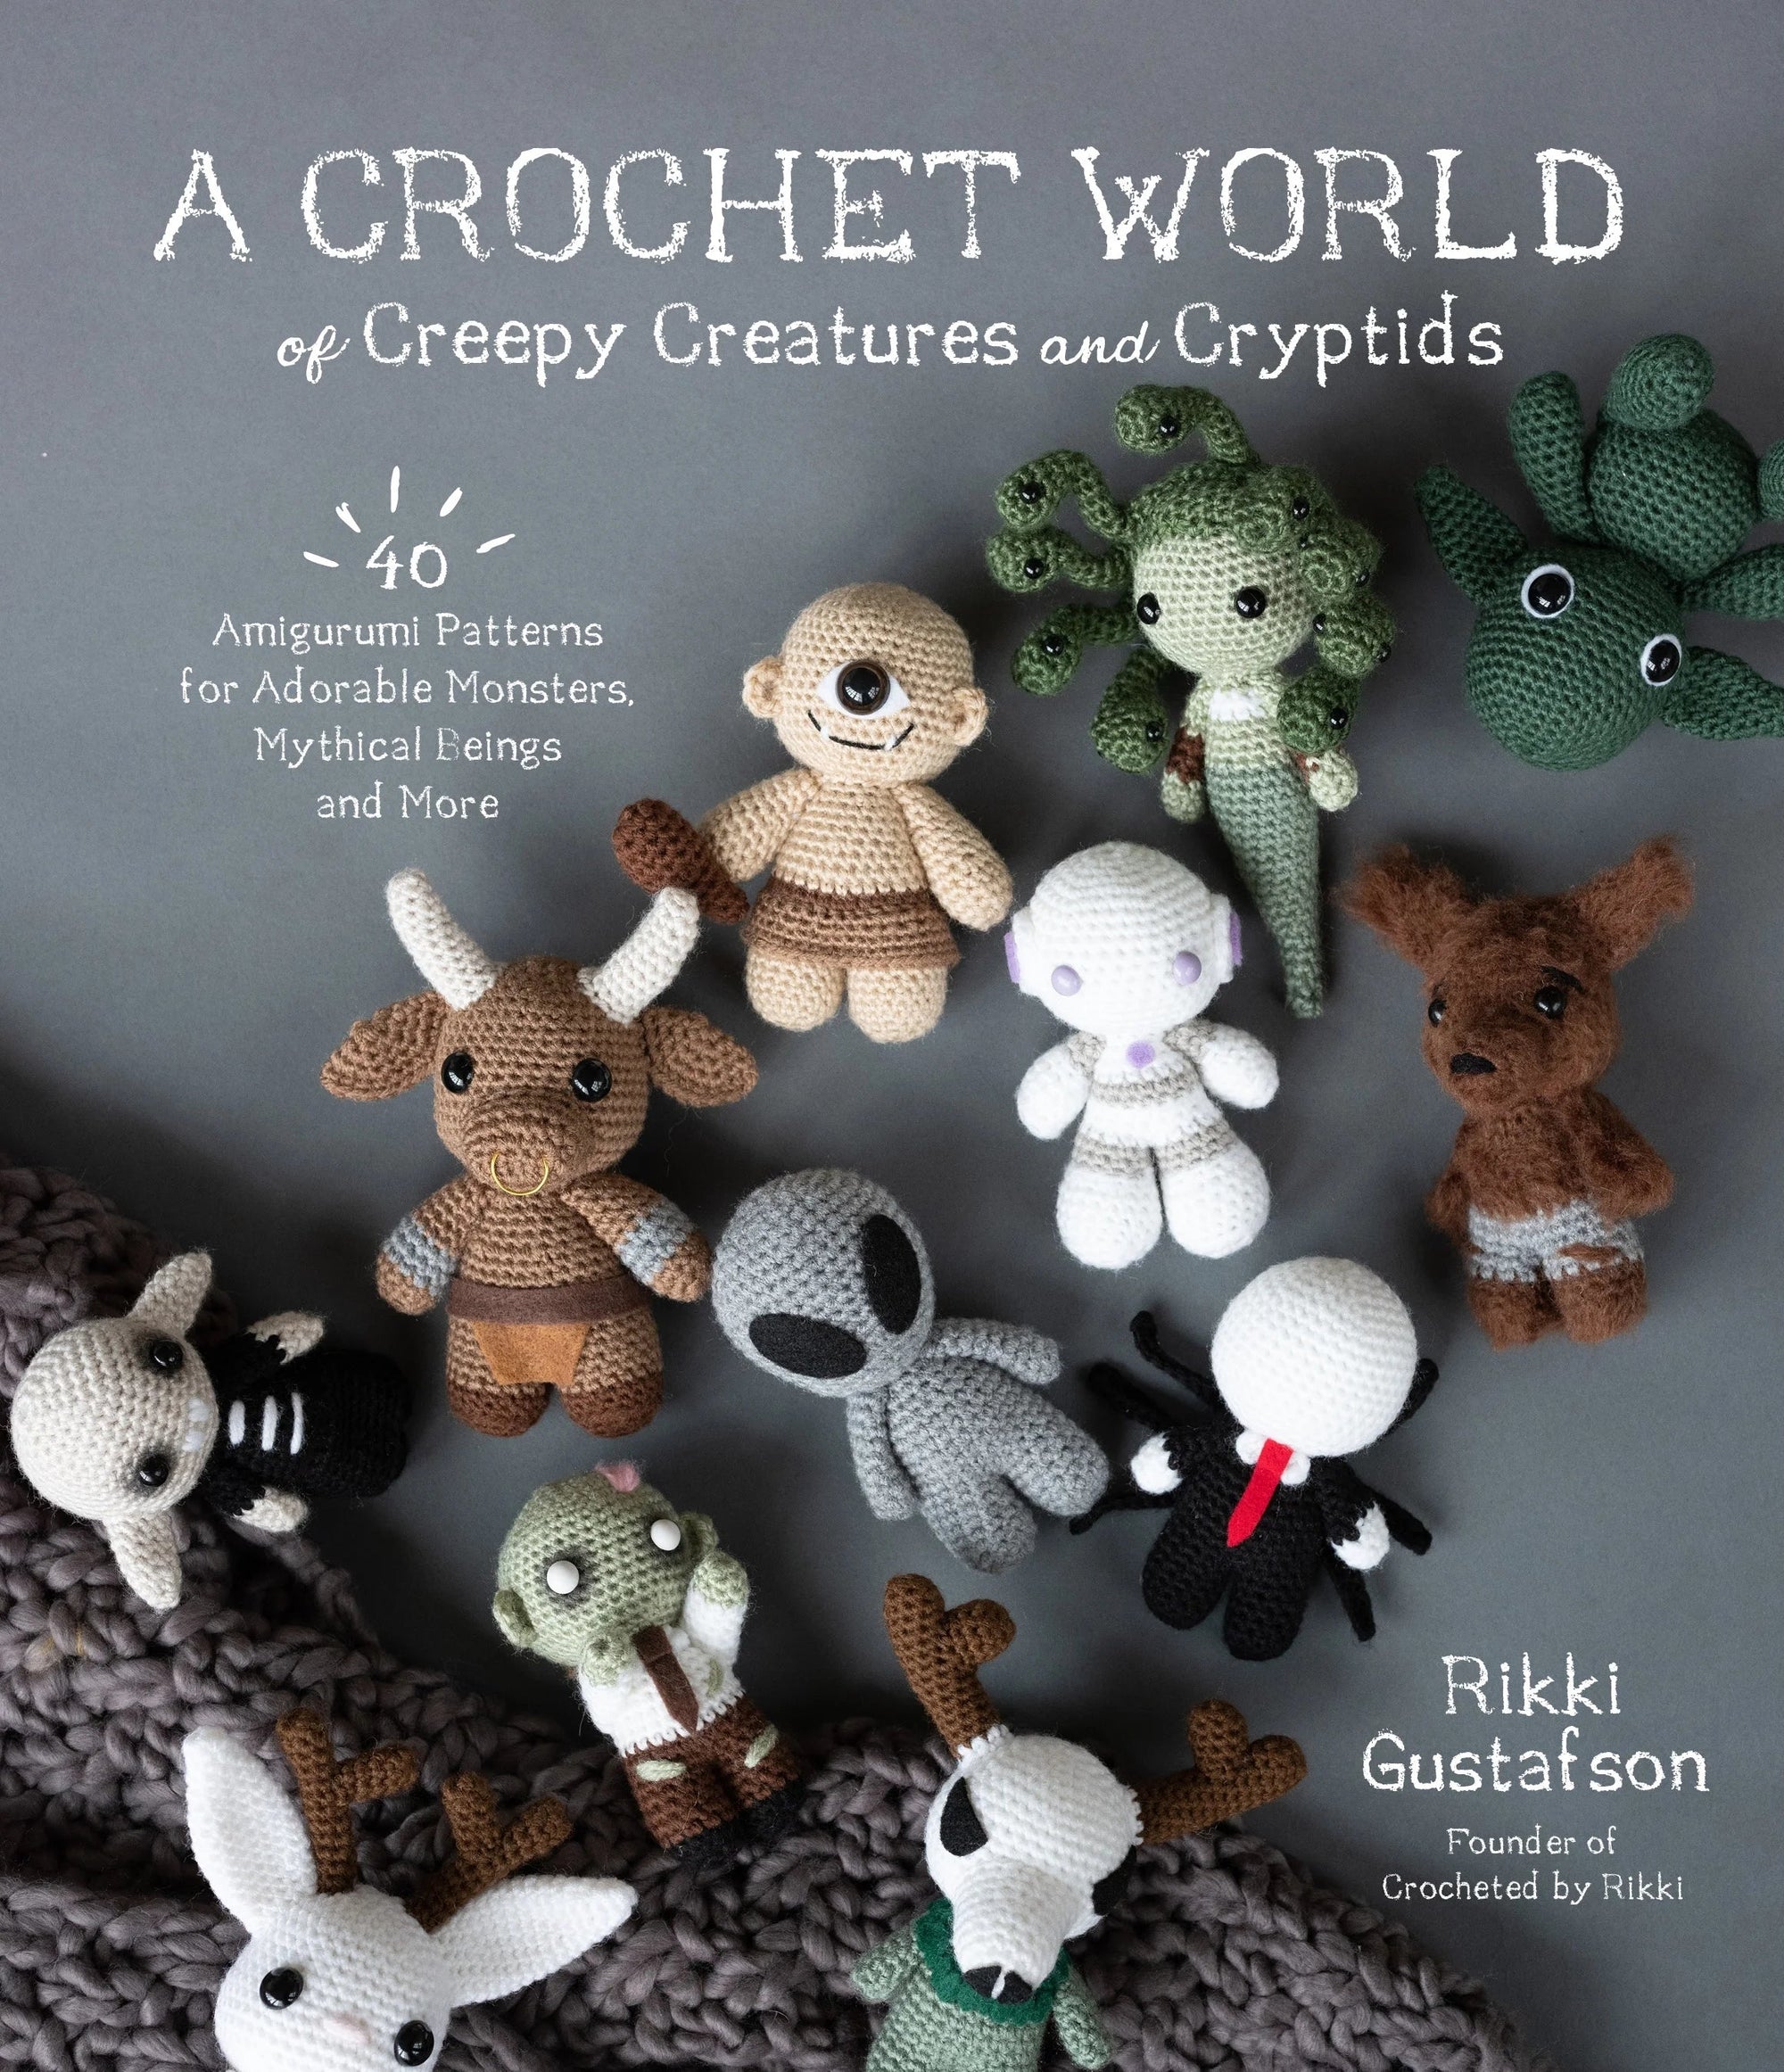 A Crochet World of Creepy Creatures and Cryptids - Rikki Gustafson - The Little Yarn Store